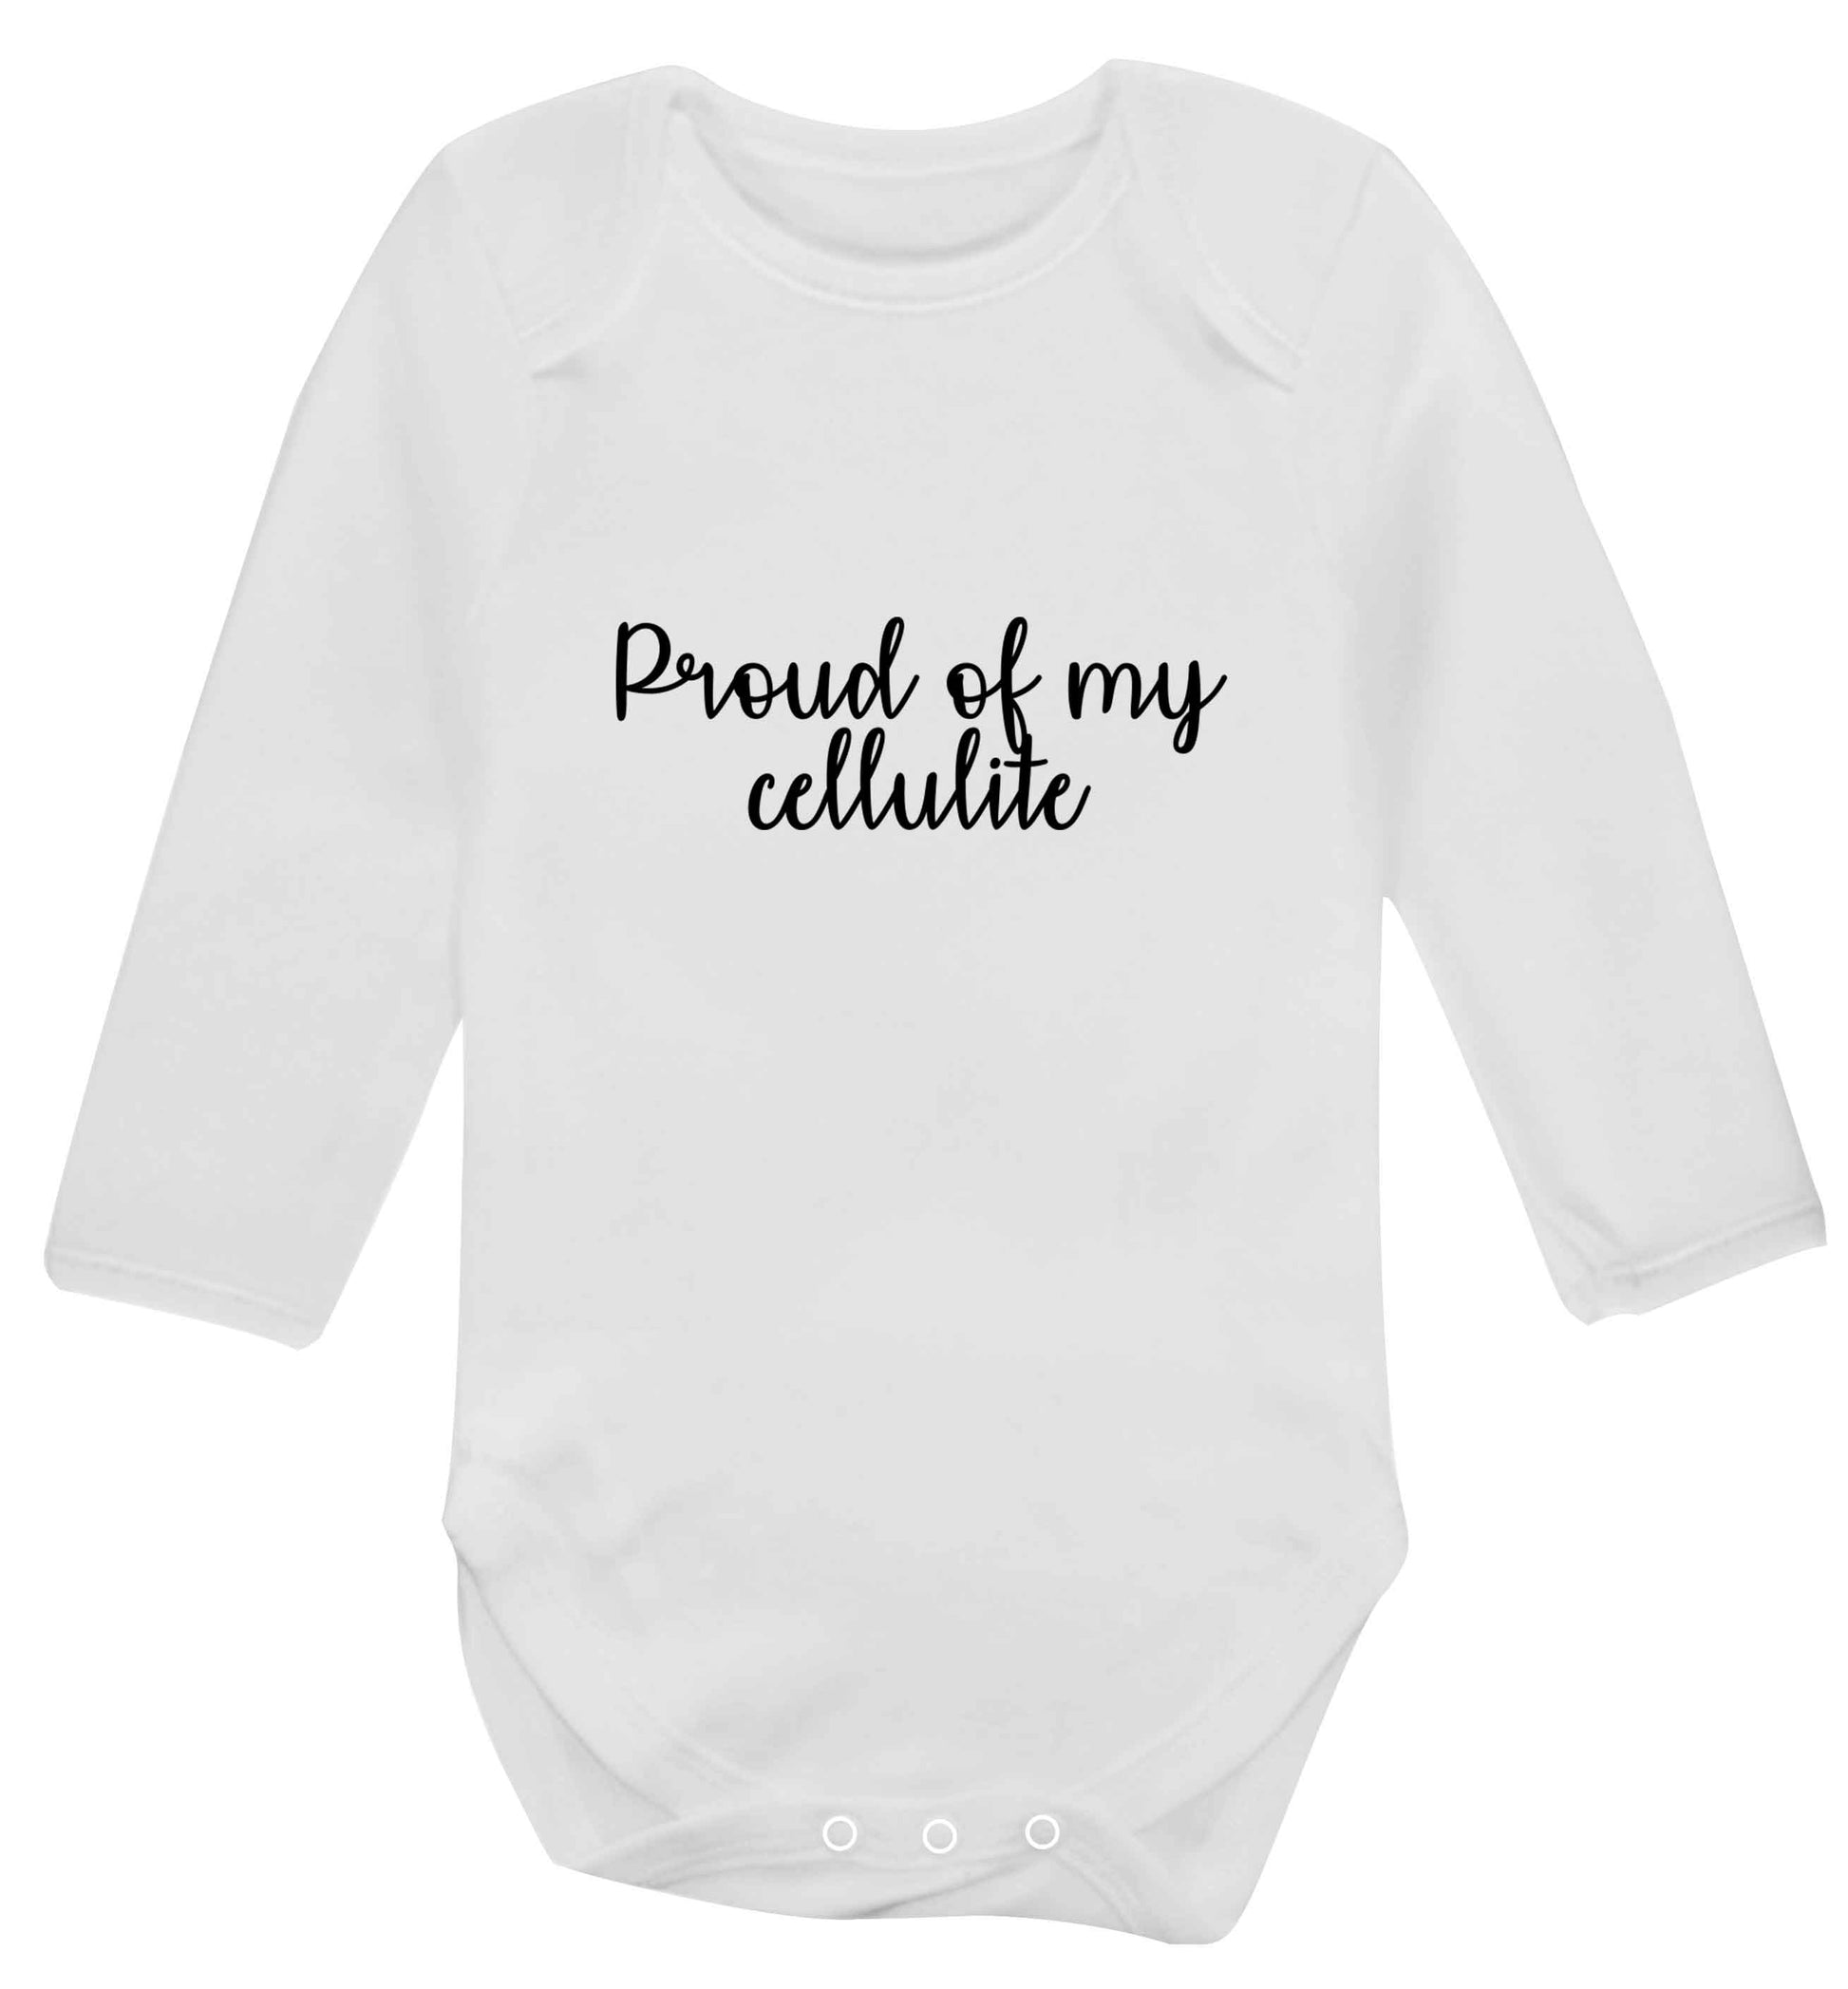 Proud of my cellulite baby vest long sleeved white 6-12 months